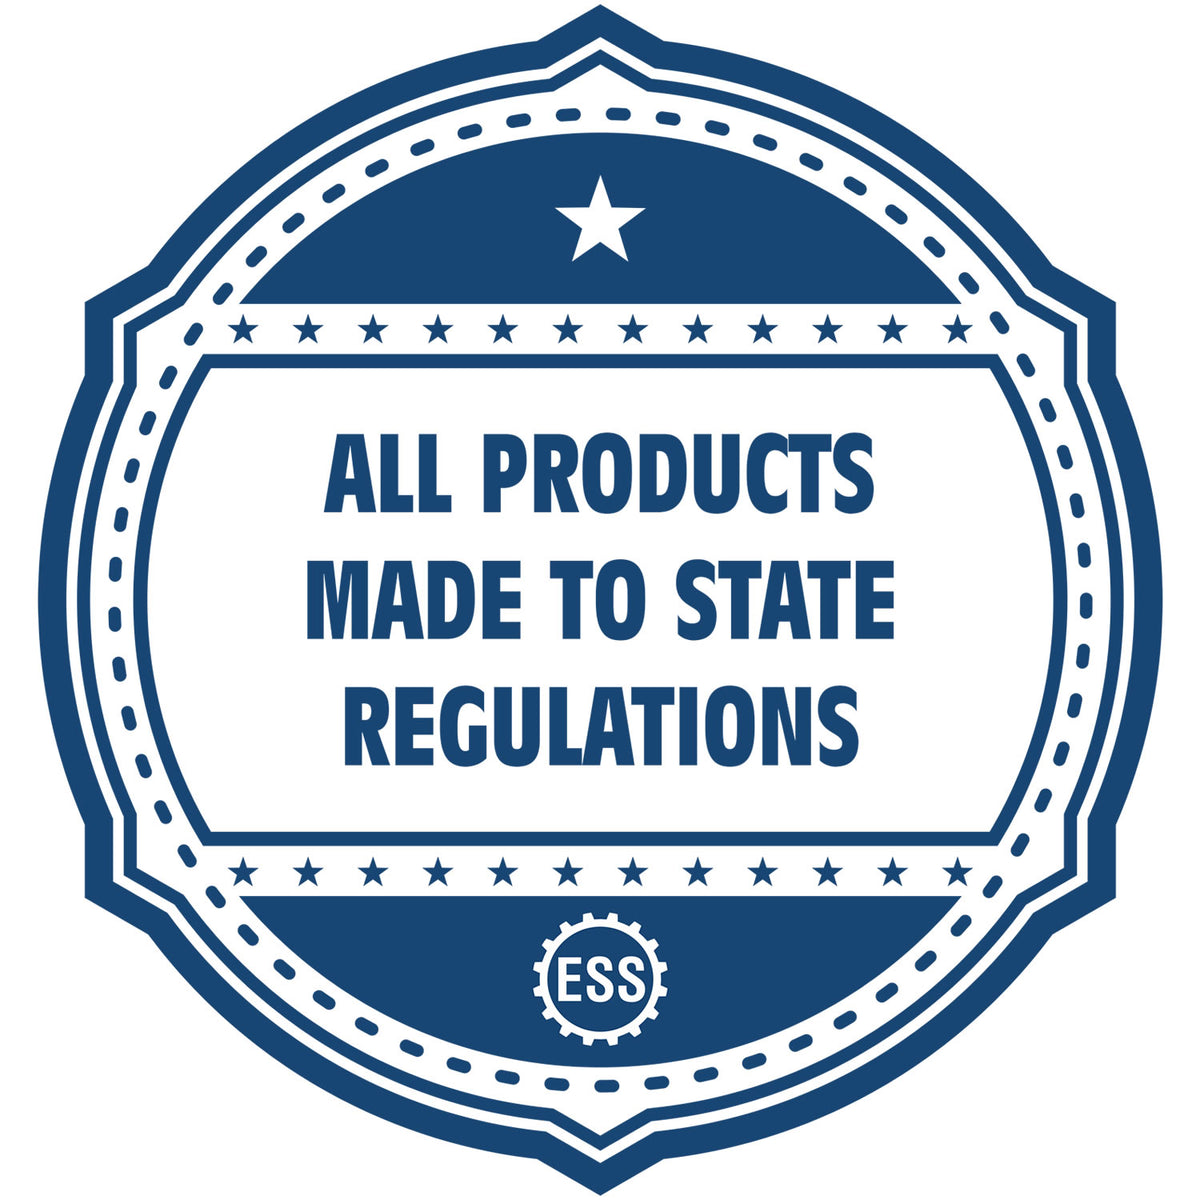 An icon or badge element for the Premium MaxLight Pre-Inked Pennsylvania Engineering Stamp showing that this product is made in compliance with state regulations.